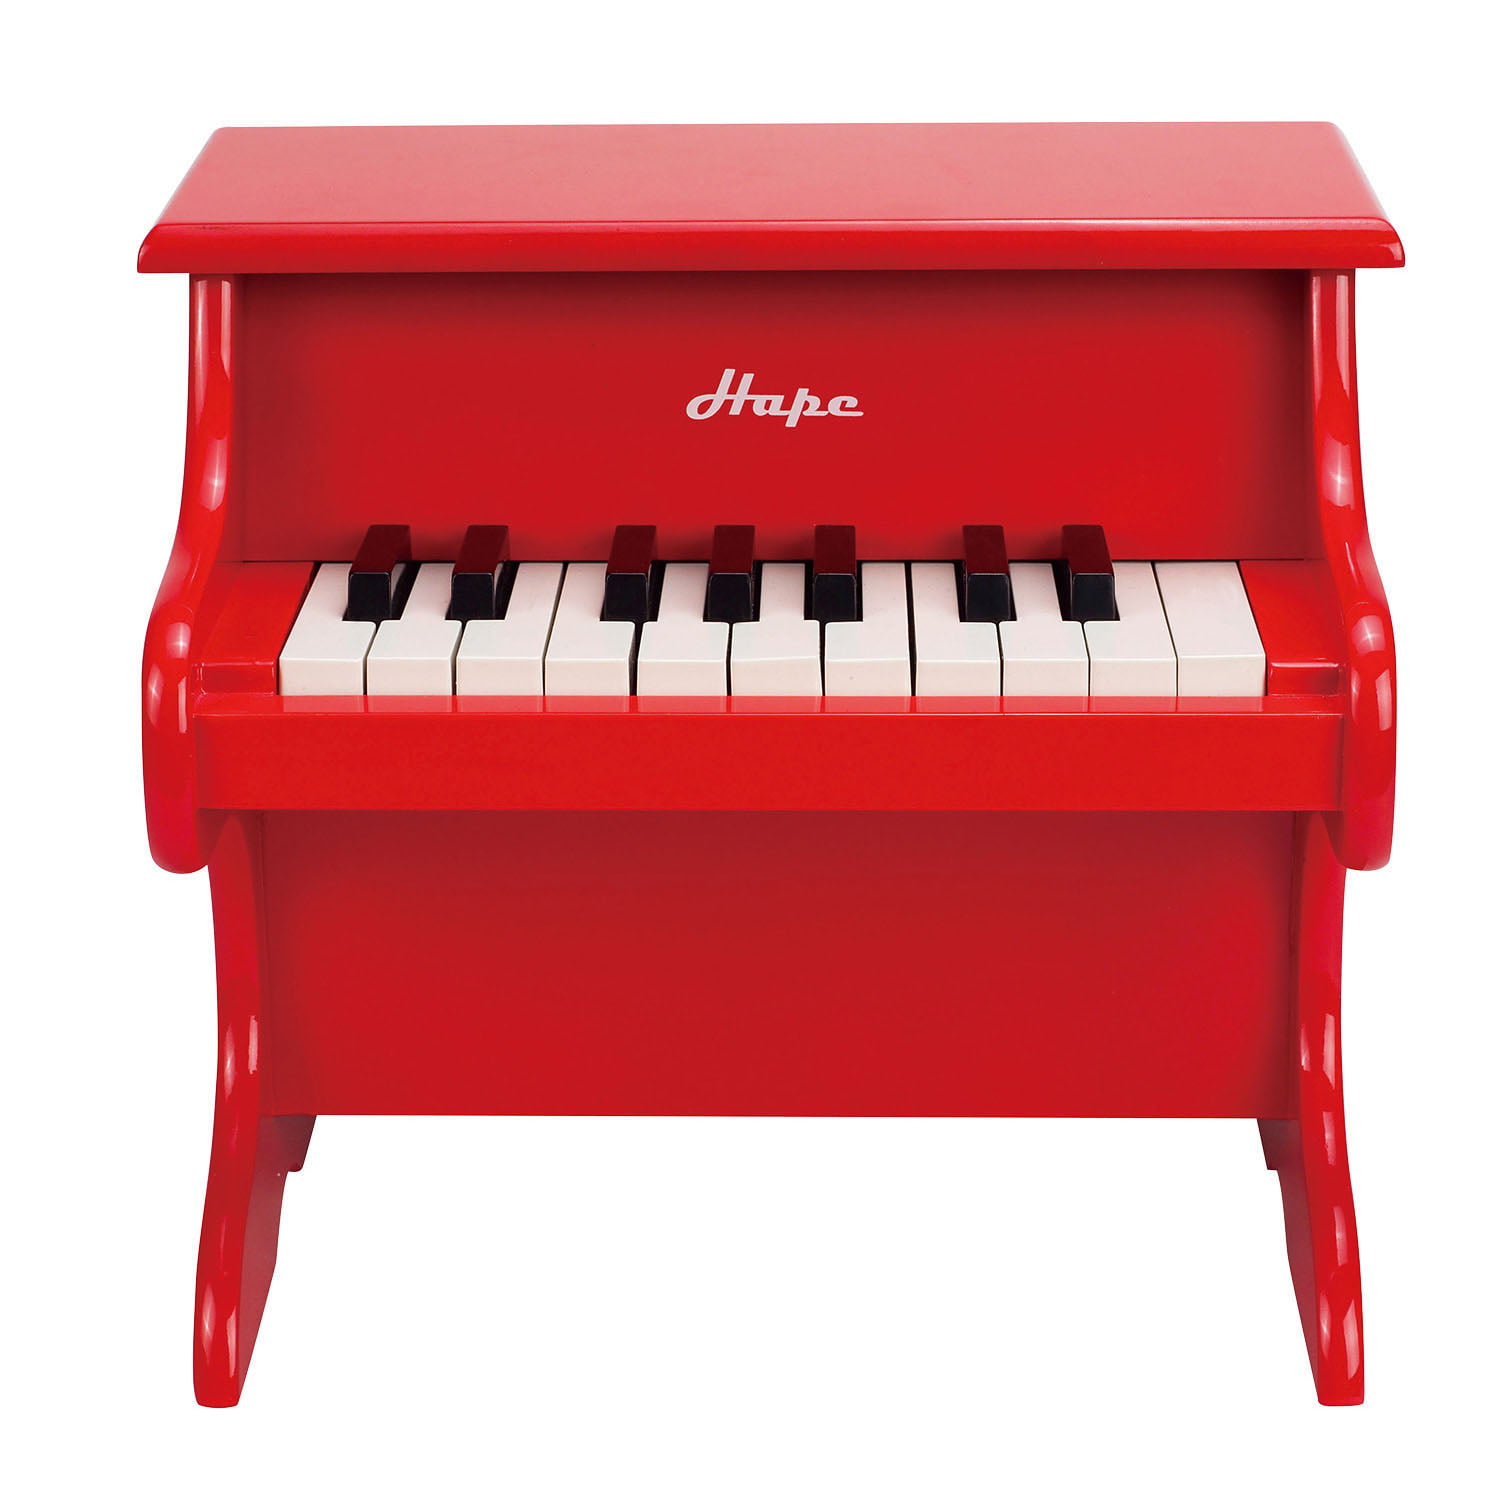 Hape Toys Playful Piano Red Wooden Happy Grand Piano for Toddlers & Children 